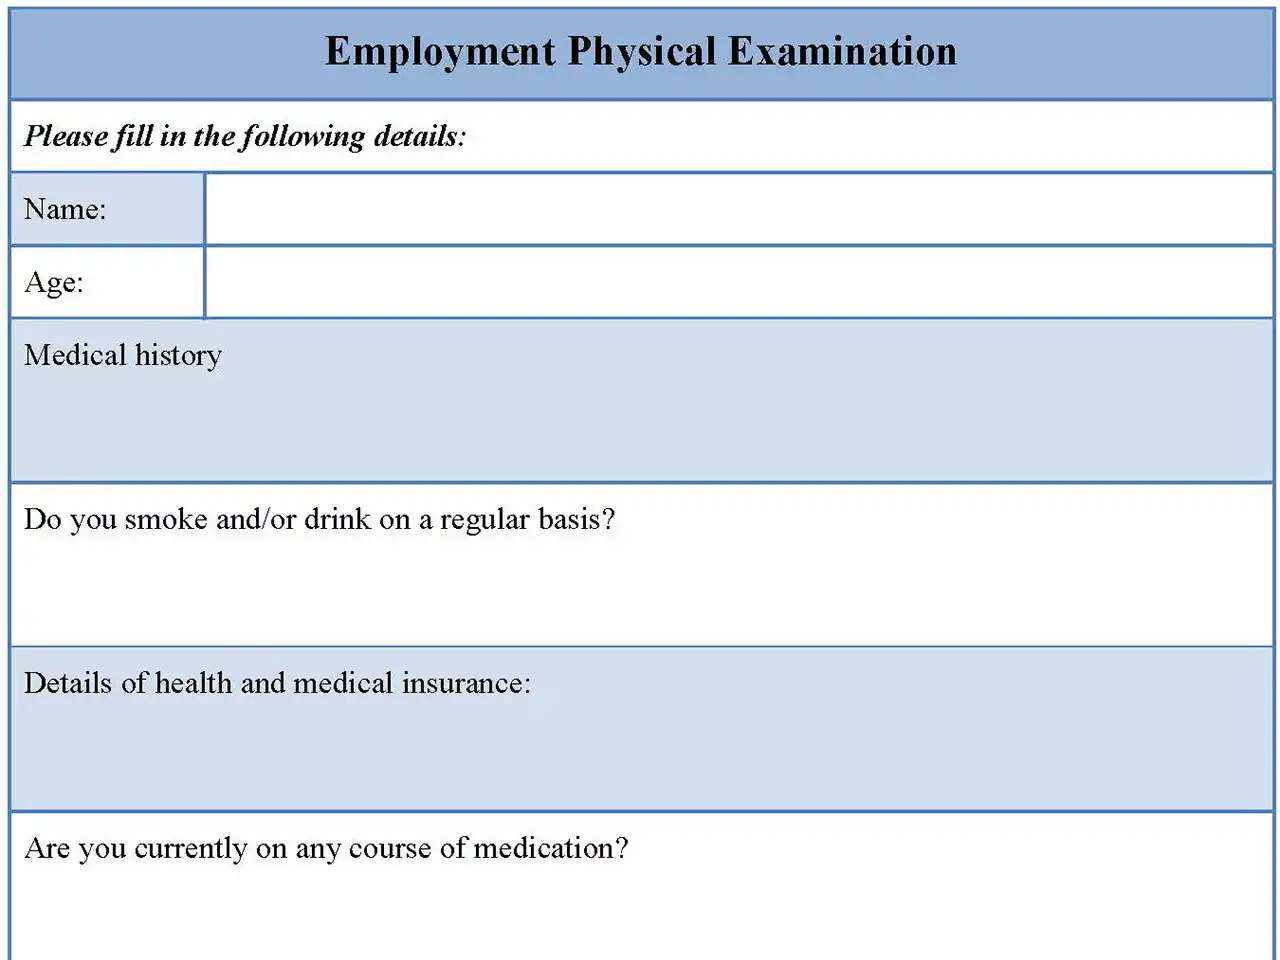 Employment Physical Examination Form